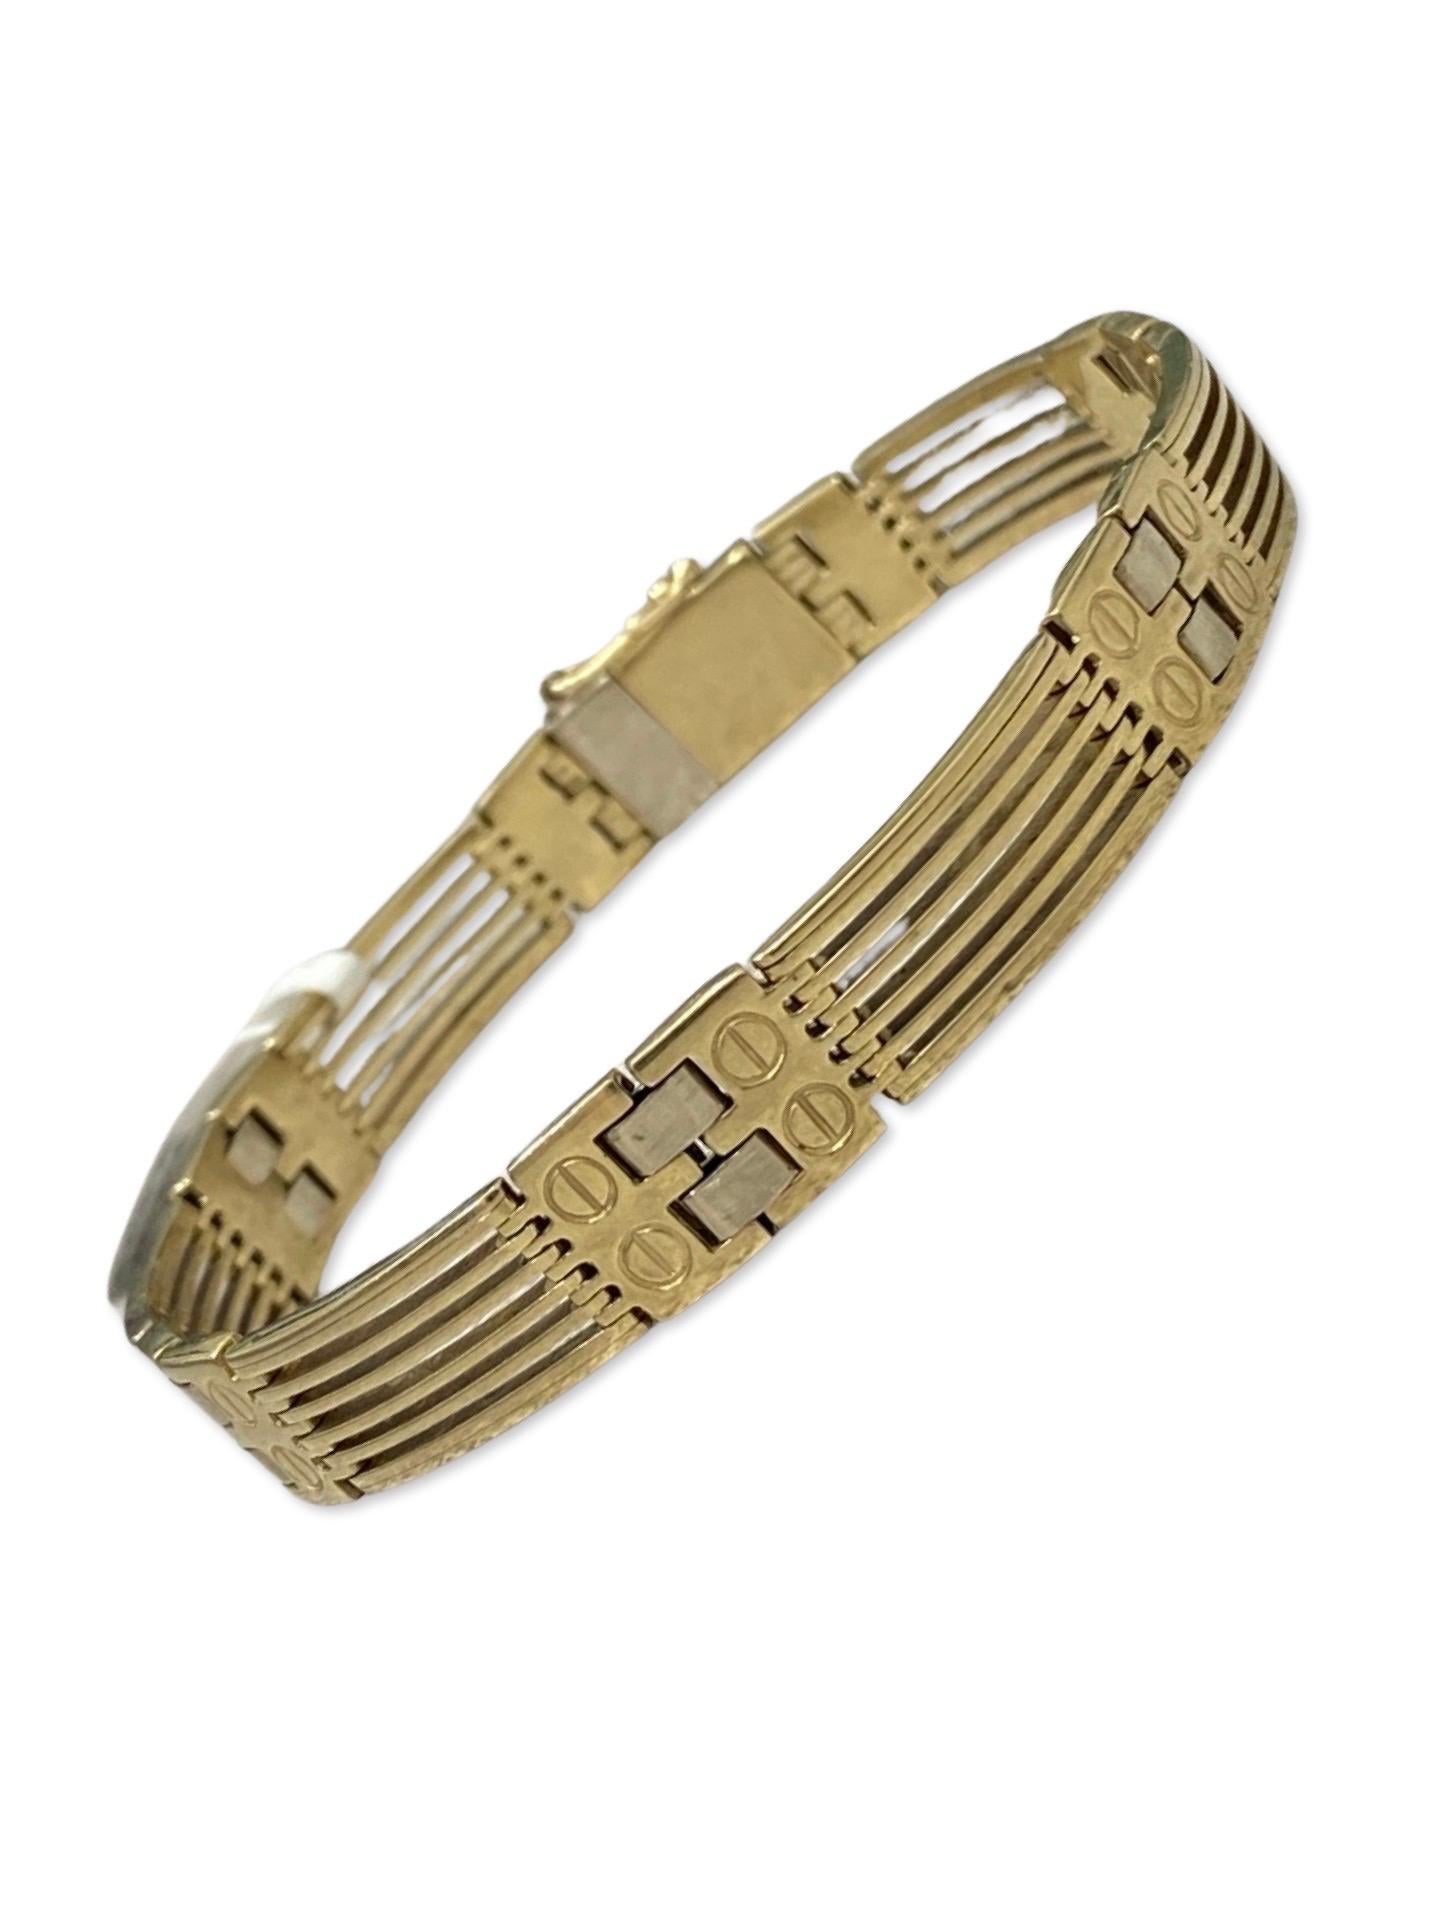 Vintage Men’s 10mm Fancy Screw Design Bracelet 14k Gold 8.5 Inch. The bracelet is signed by maker AG and weights 30.6g solid gold. Very unique vintage piece of jewelry for a true collection.